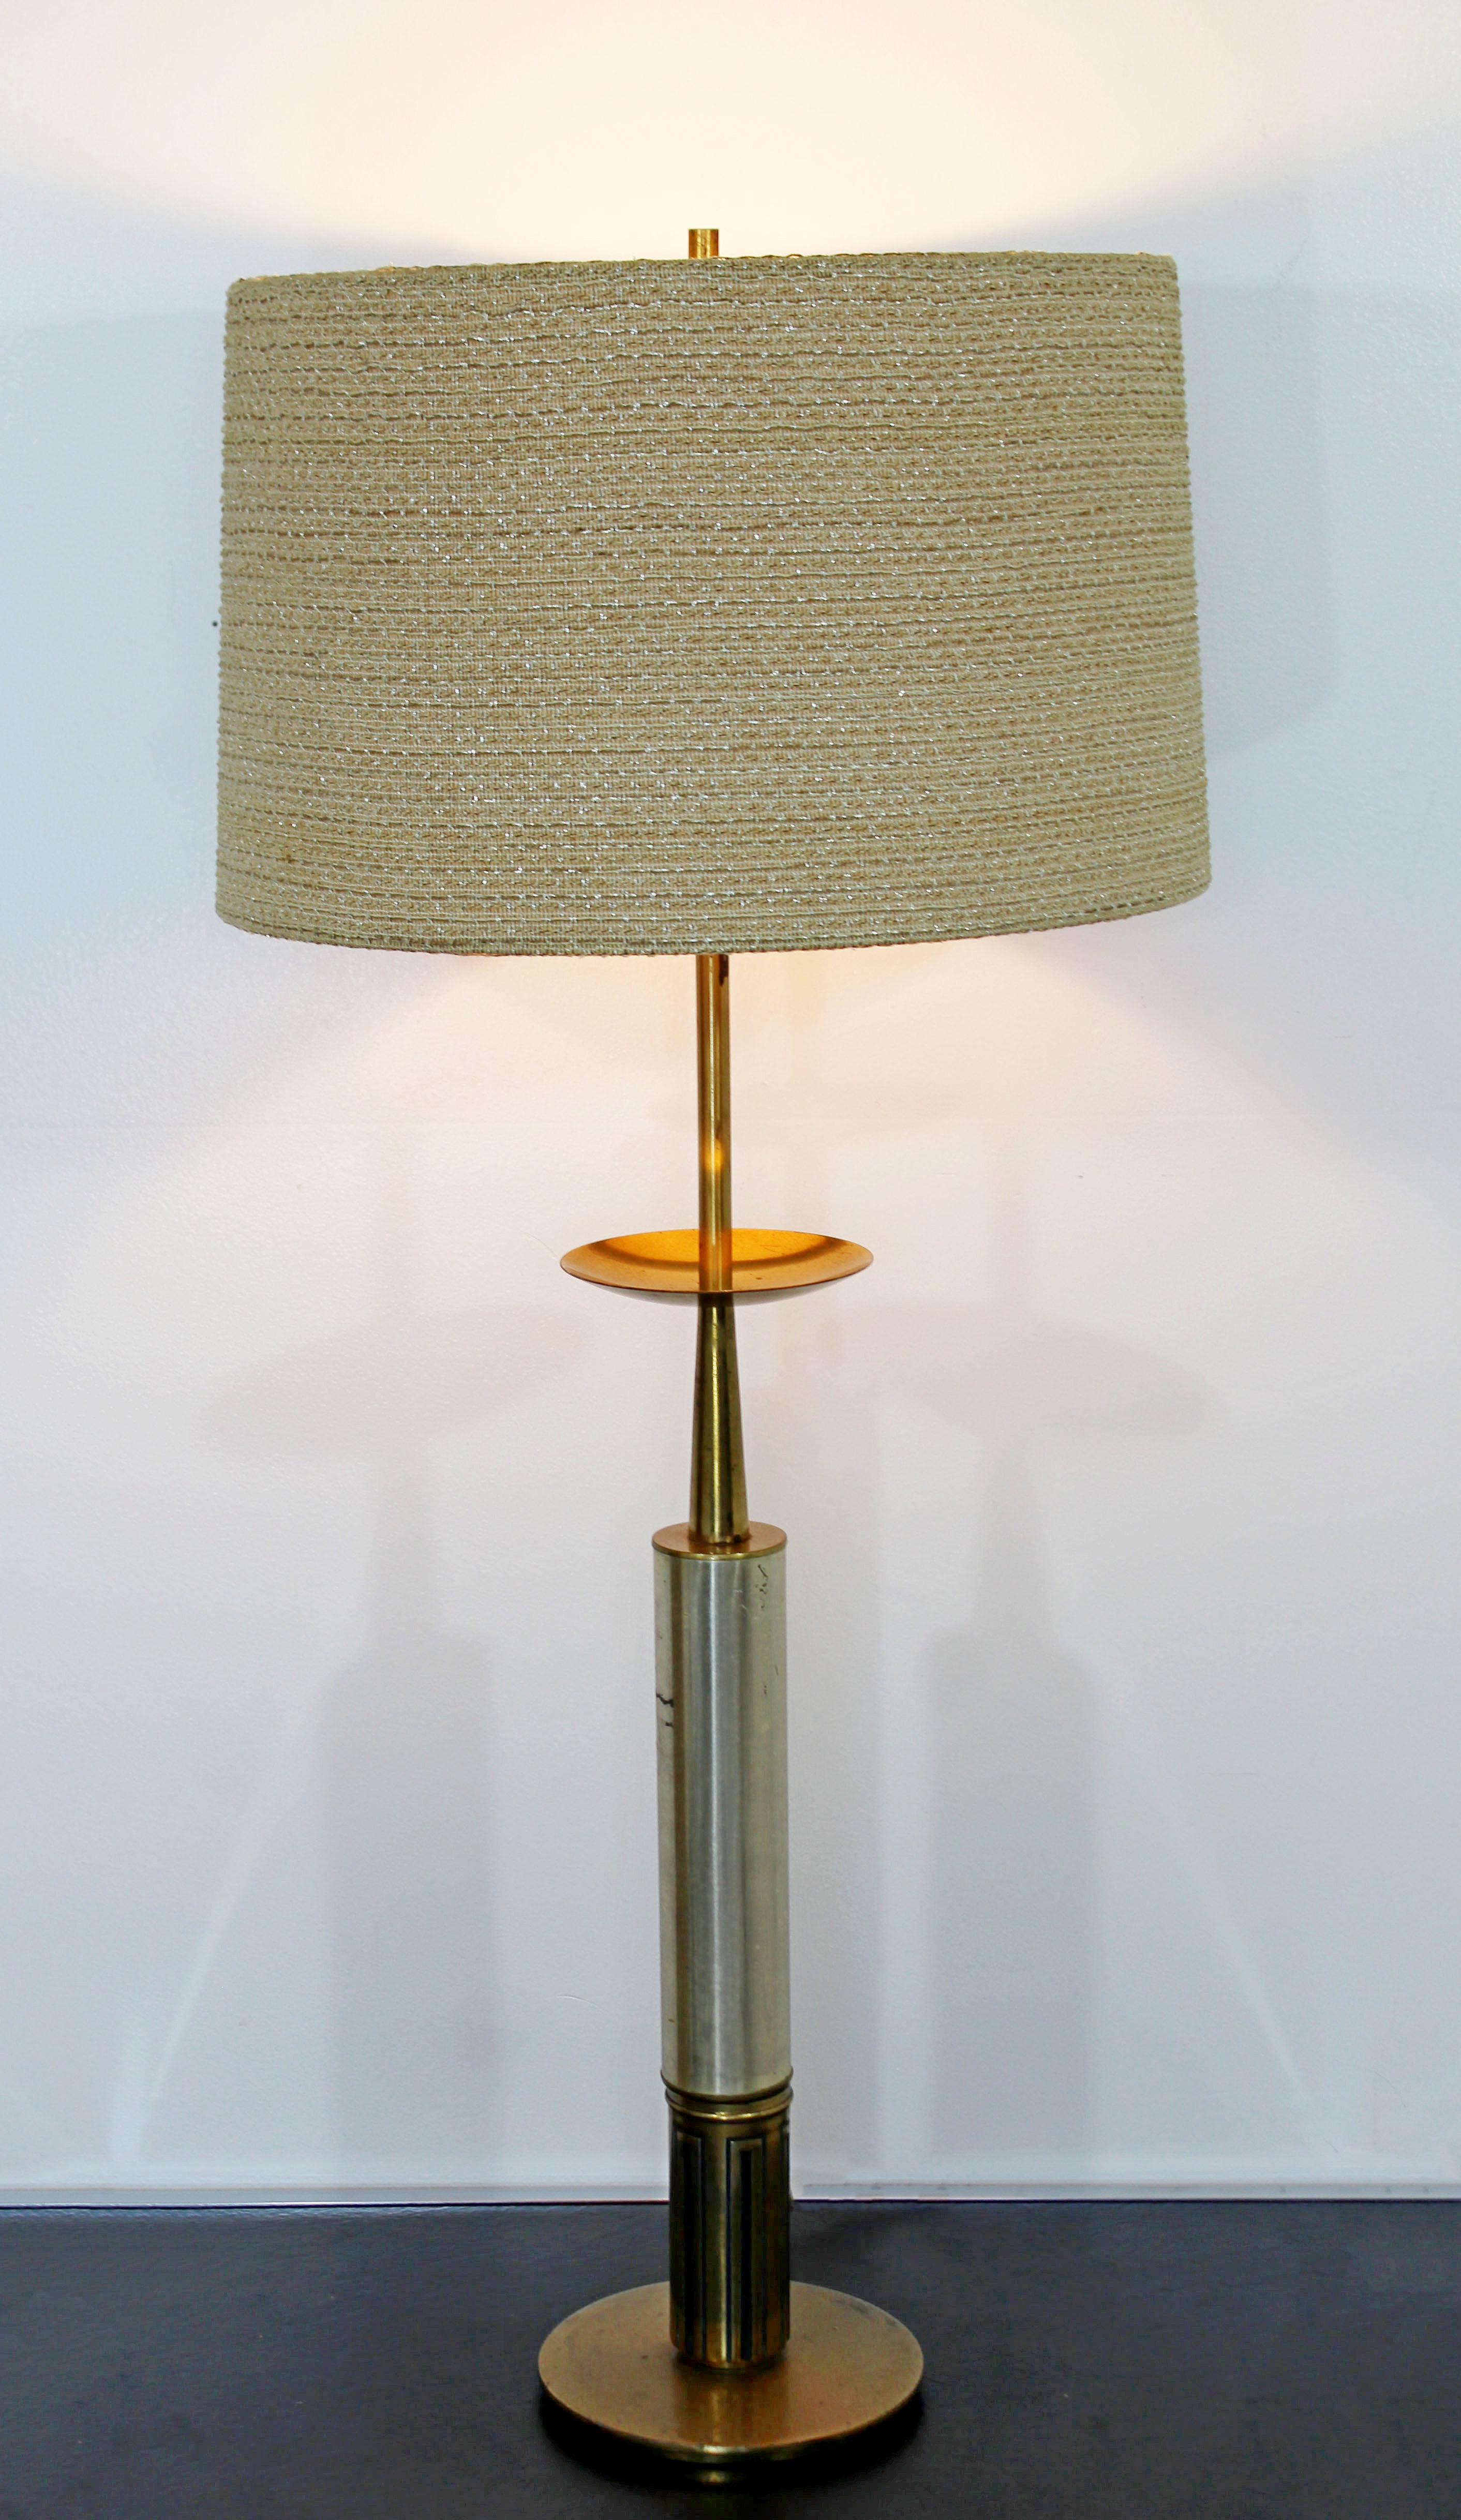 For your consideration is a fabulous, brass and silver plated table lamp, with original shade and finial, in the style of Tommi Parzinger, circa the 1960s. In good condition. The dimensions of the lamp are 8